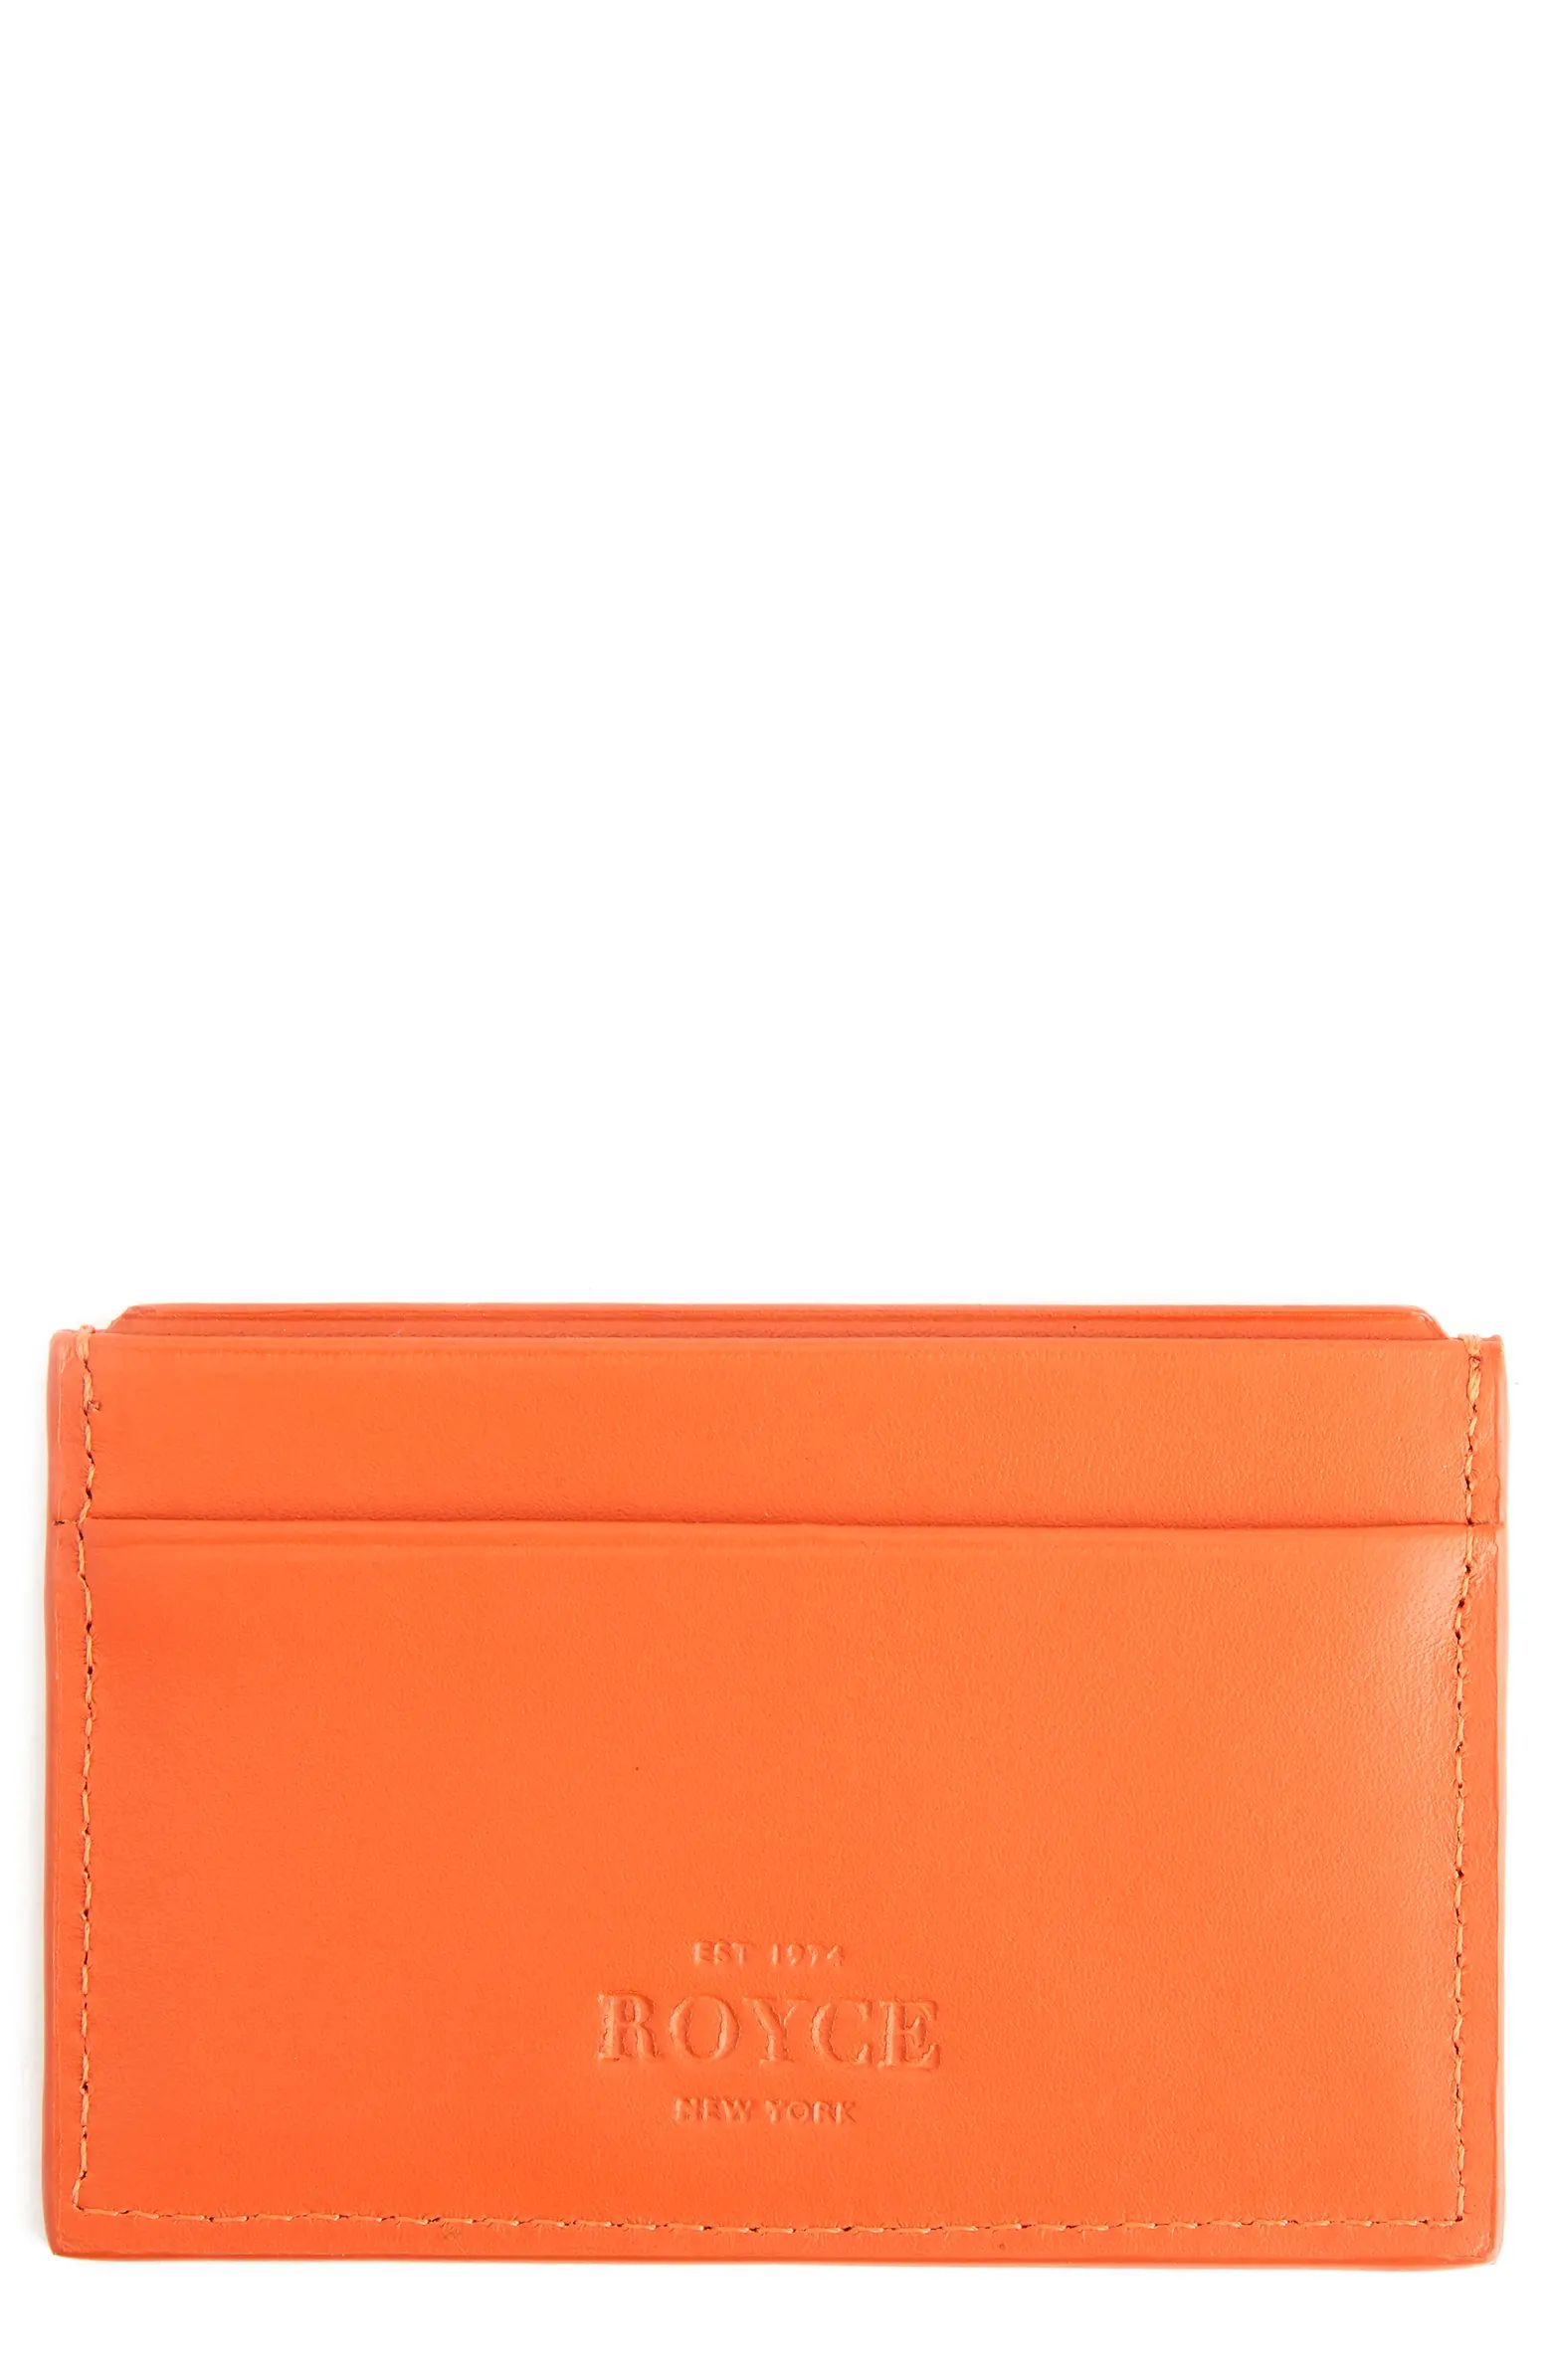 ROYCE New York Personalized RFID Leather Card Case | Nordstrom | Nordstrom